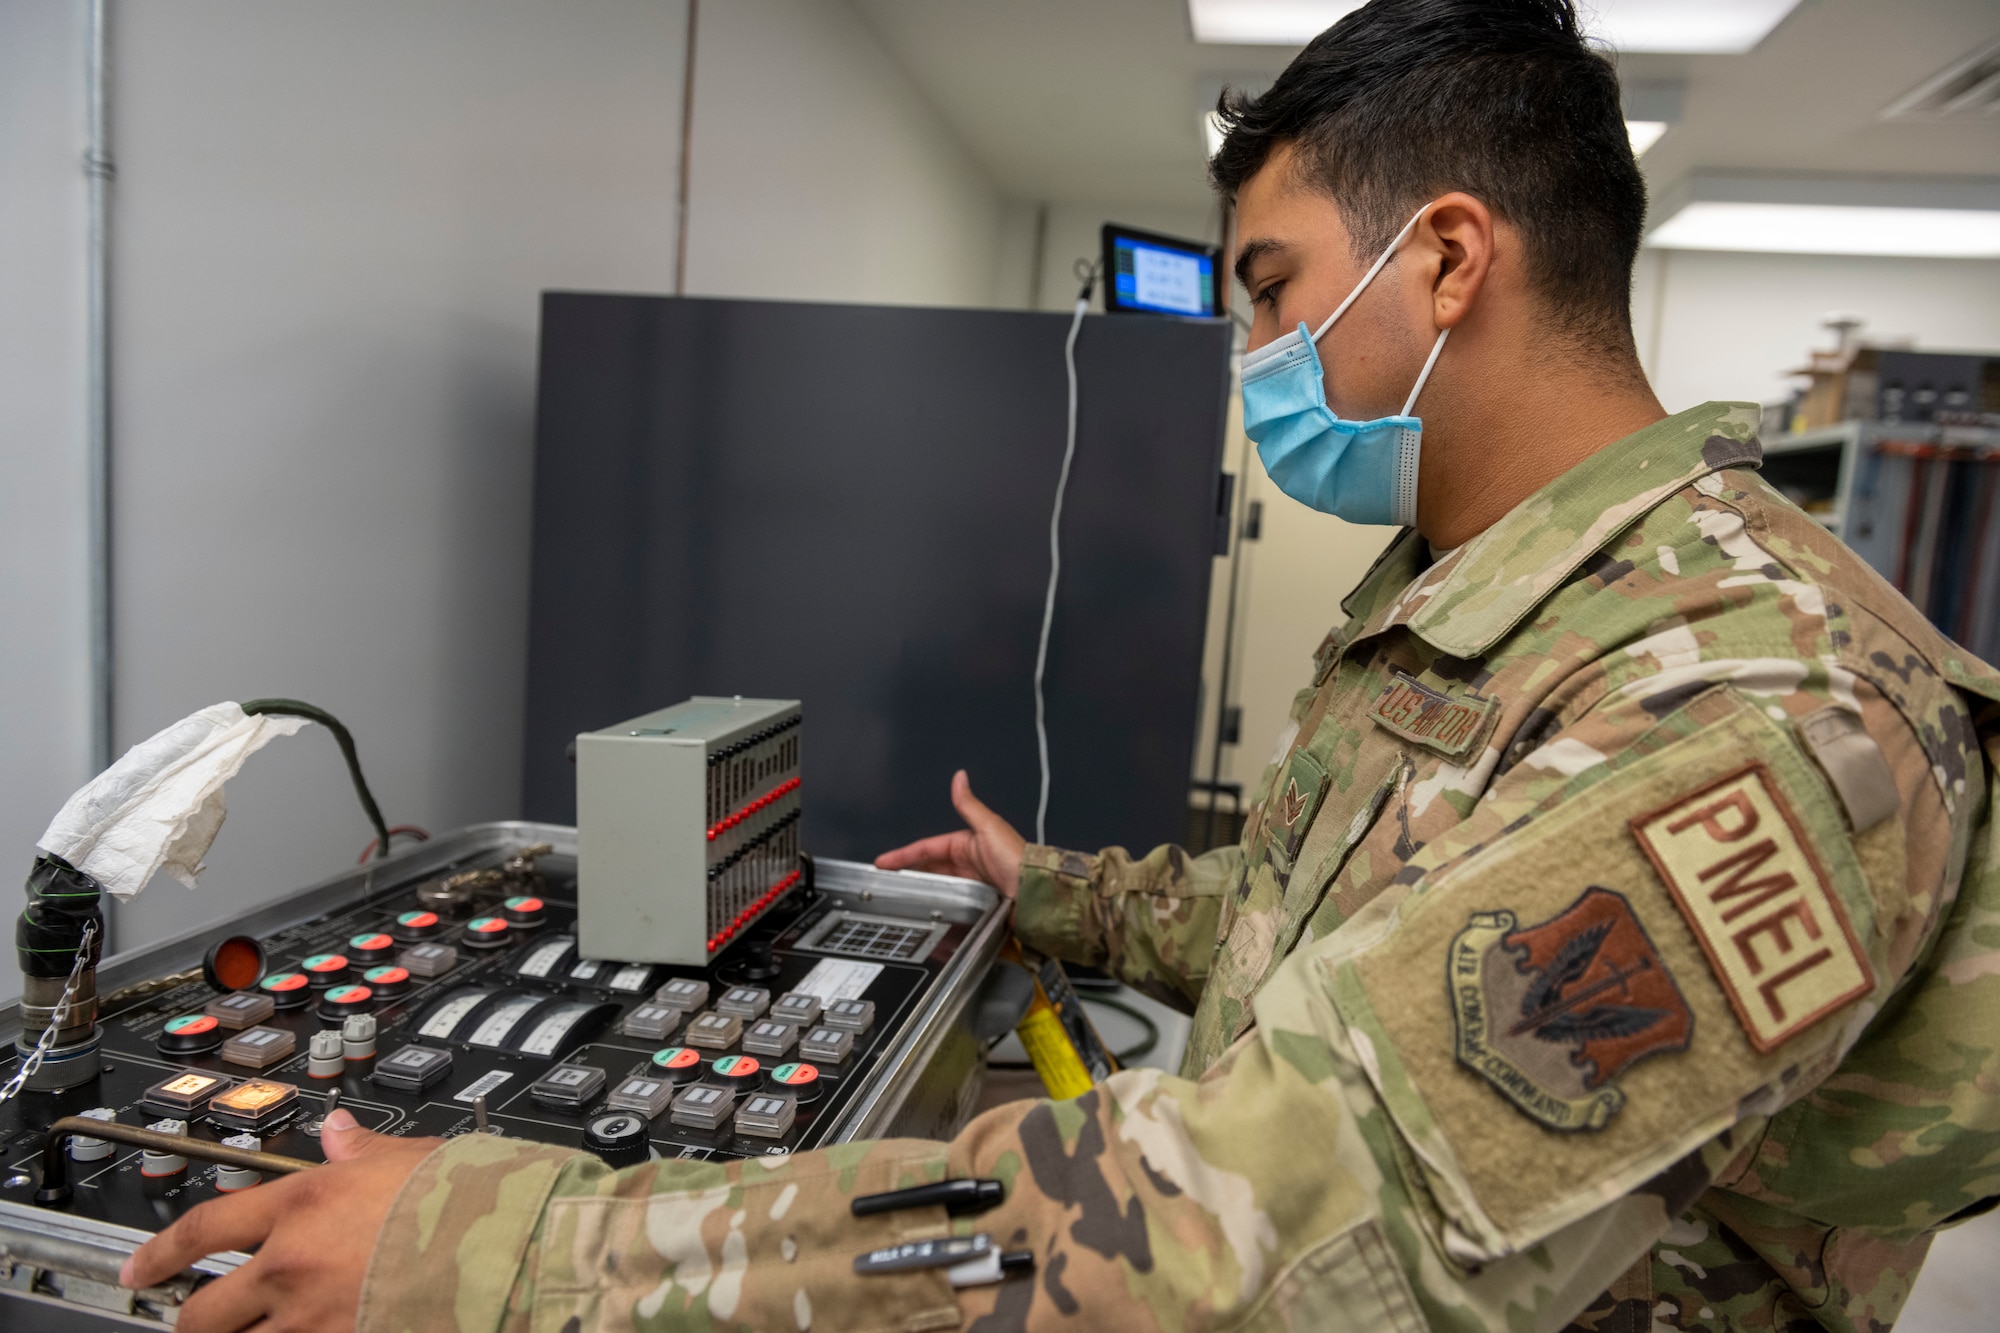 Senior Airman Manuel Martinez Dubray, 4th Component Maintenance Squadron precision measurement equipment laboratory (PMEL) electronics technician, examines a control stick boost and pitch compensator (CSBPC) test set at Seymour Johnson Air Force Base, North Carolina, Aug. 3, 2022. The CSBPC test set is used to ensure the control stick of an F-15E Strike Eagle is working properly. (U.S. Air Force photo by Senior Airman Kevin Holloway)